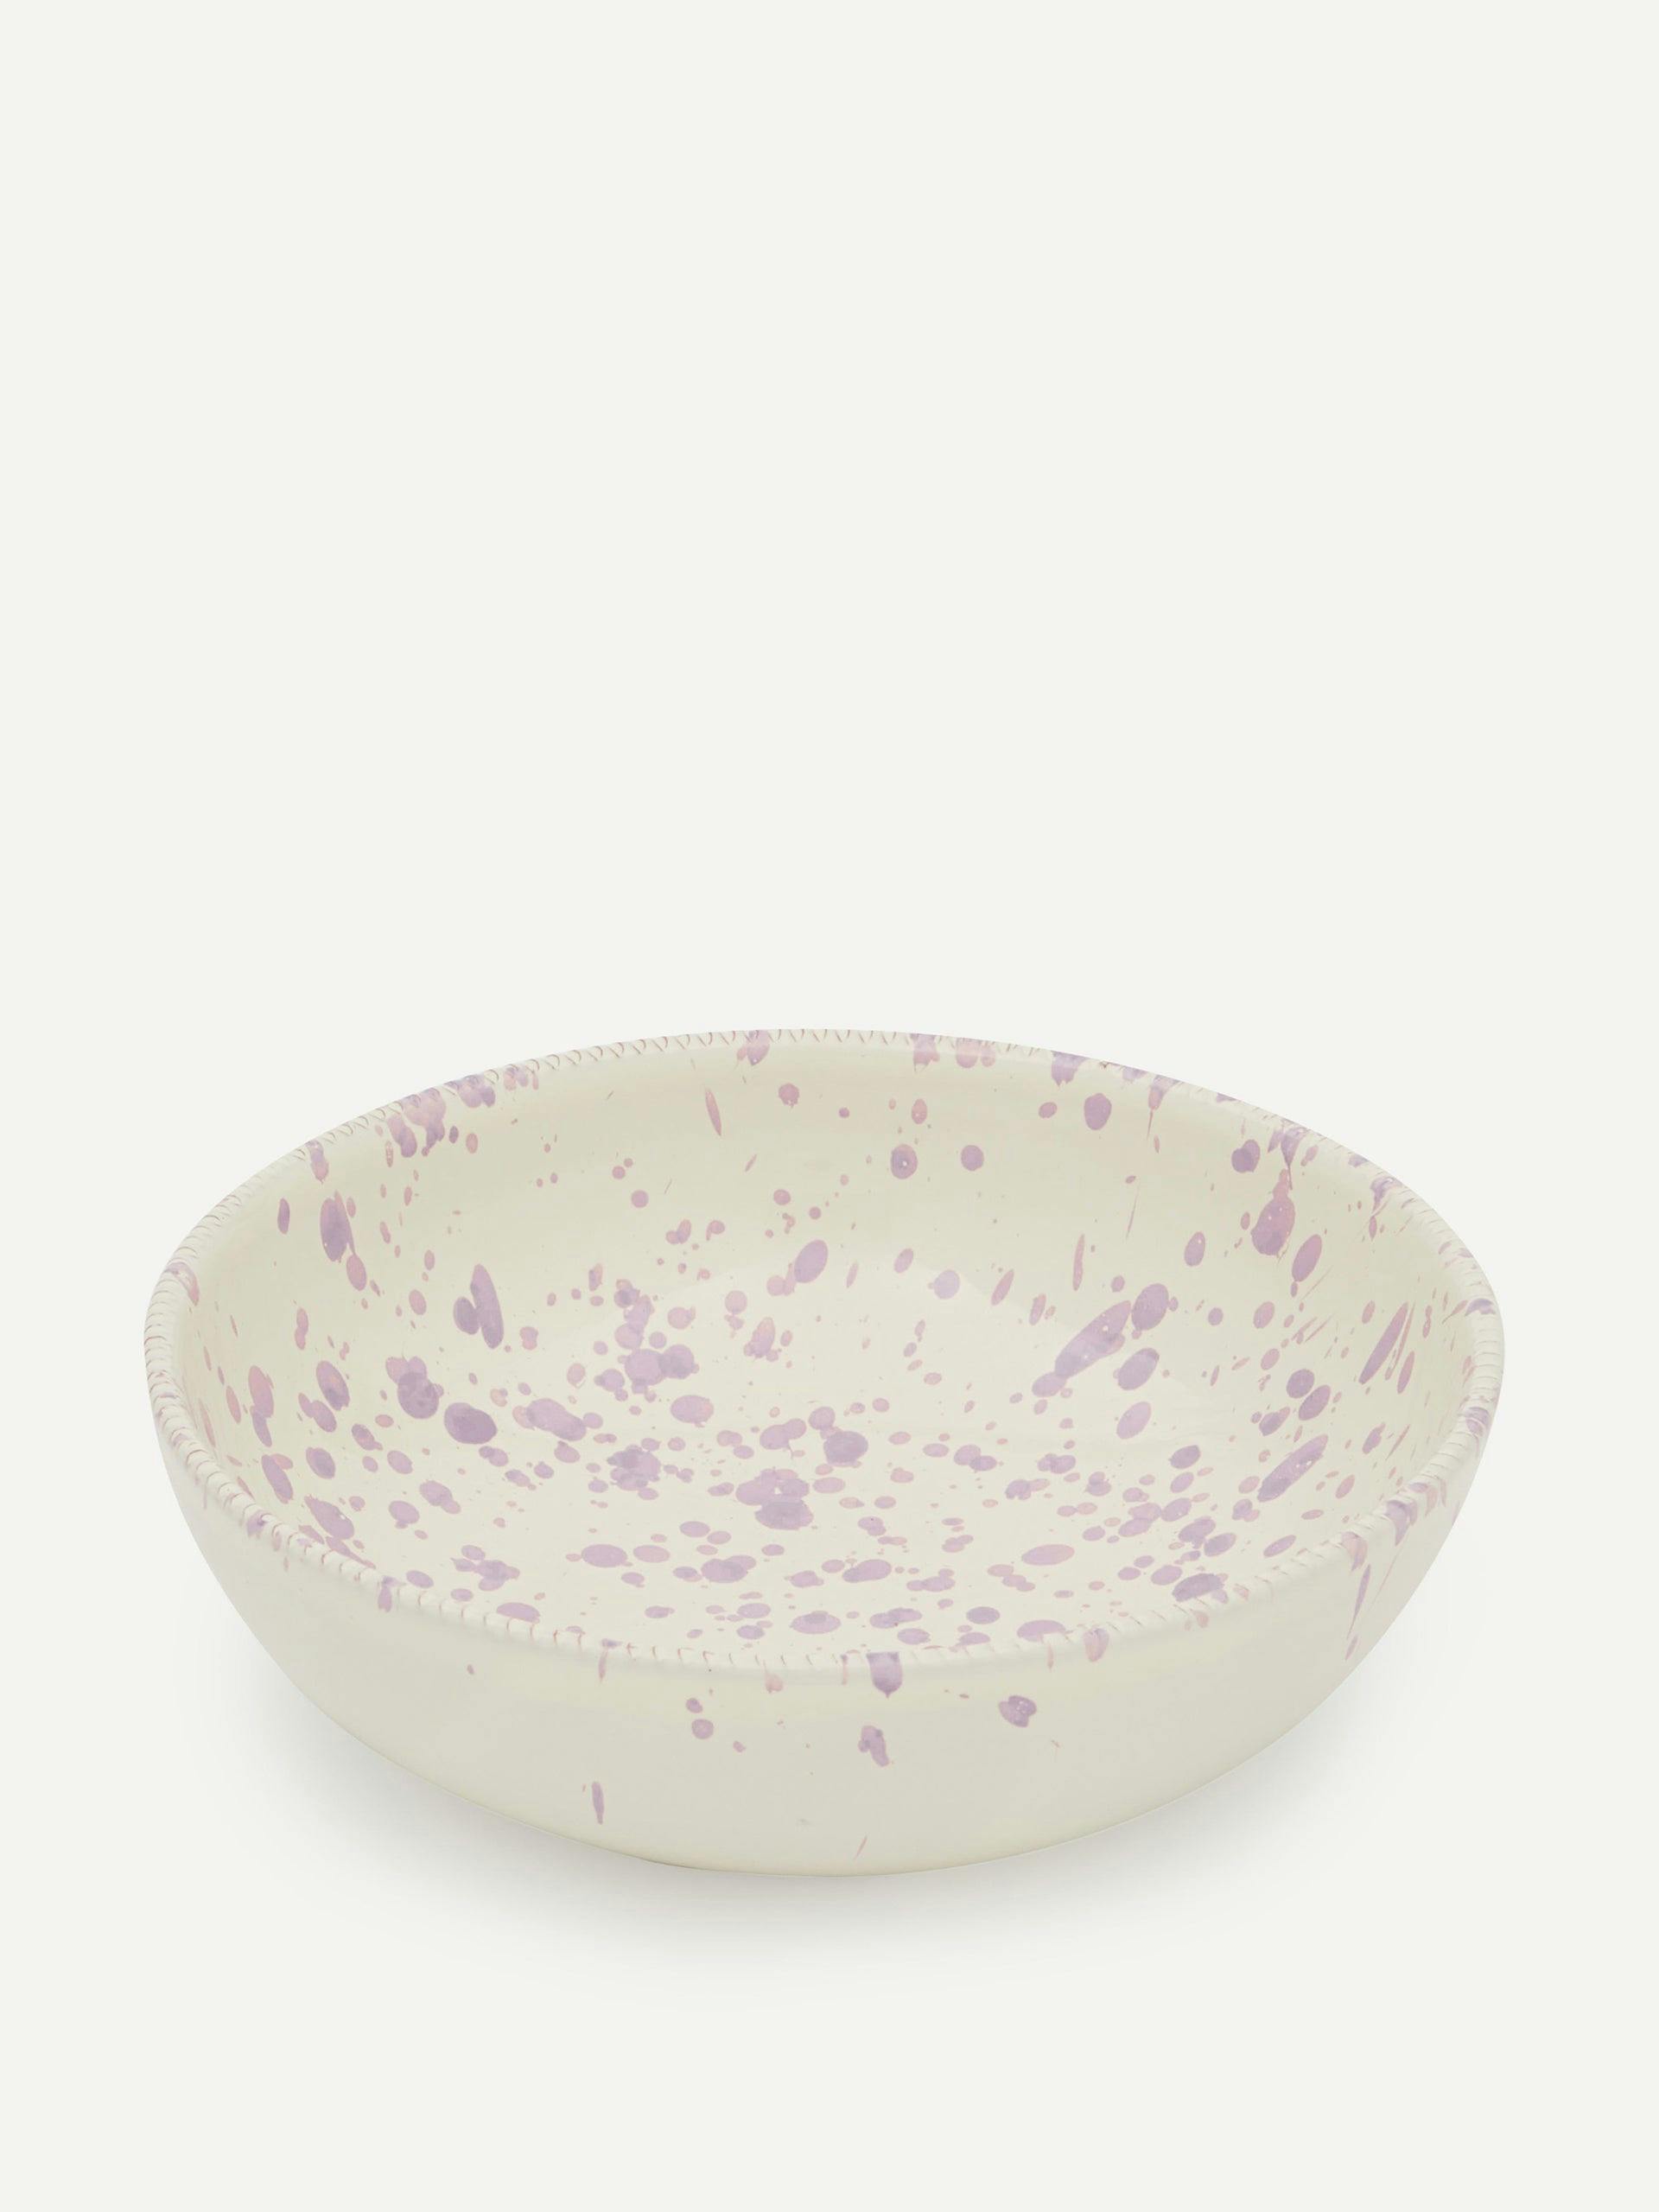 Pasta bowl in lilac